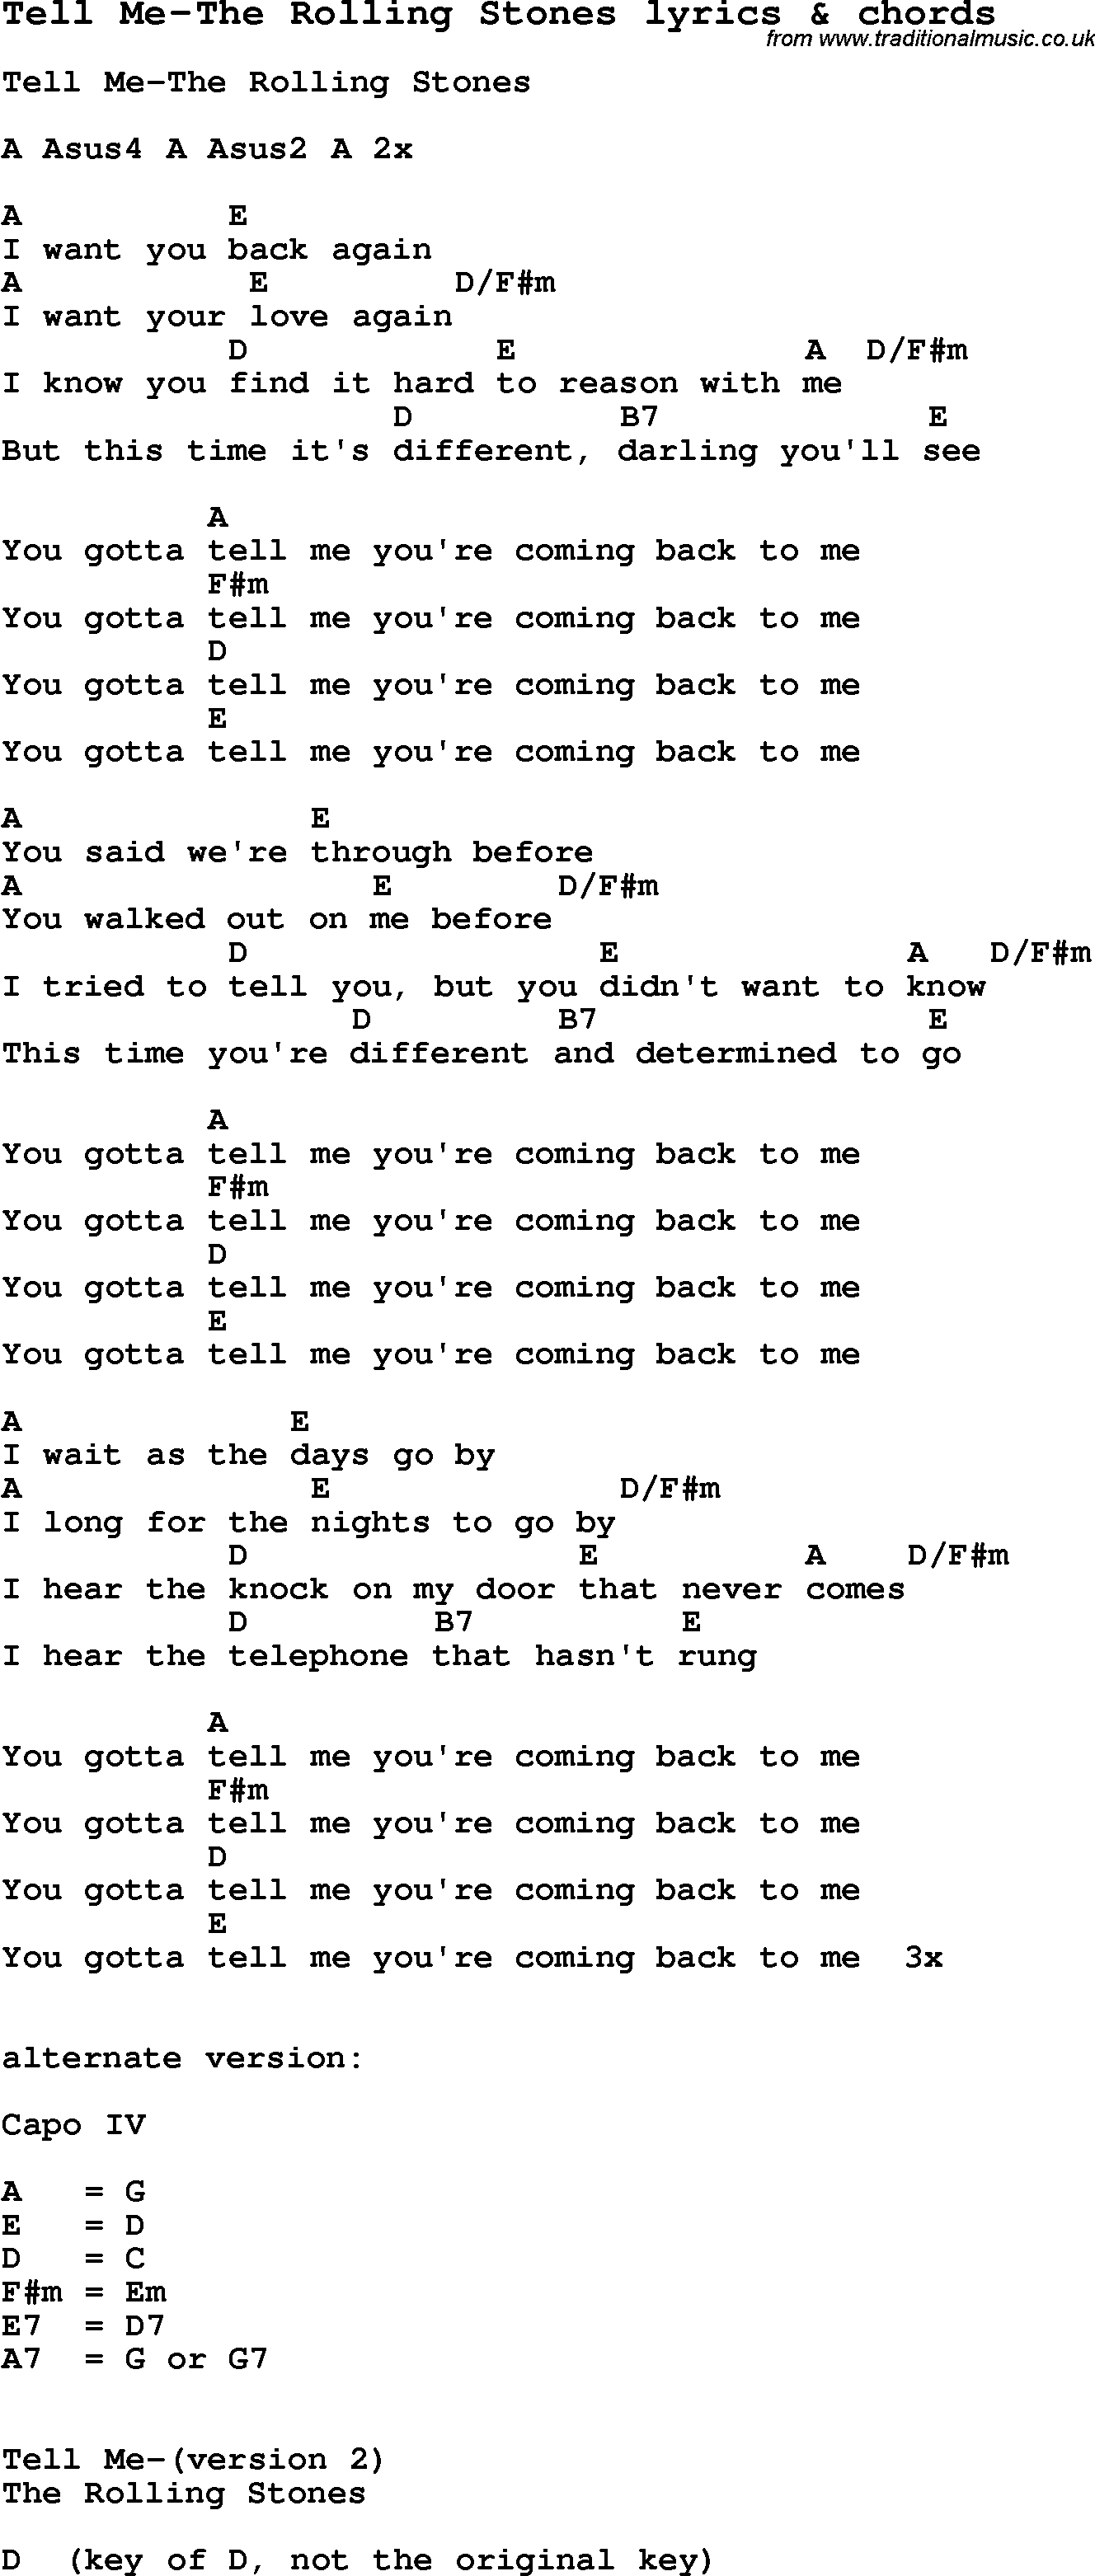 Love Song Lyrics for: Tell Me-The Rolling Stones with chords for Ukulele, Guitar Banjo etc.